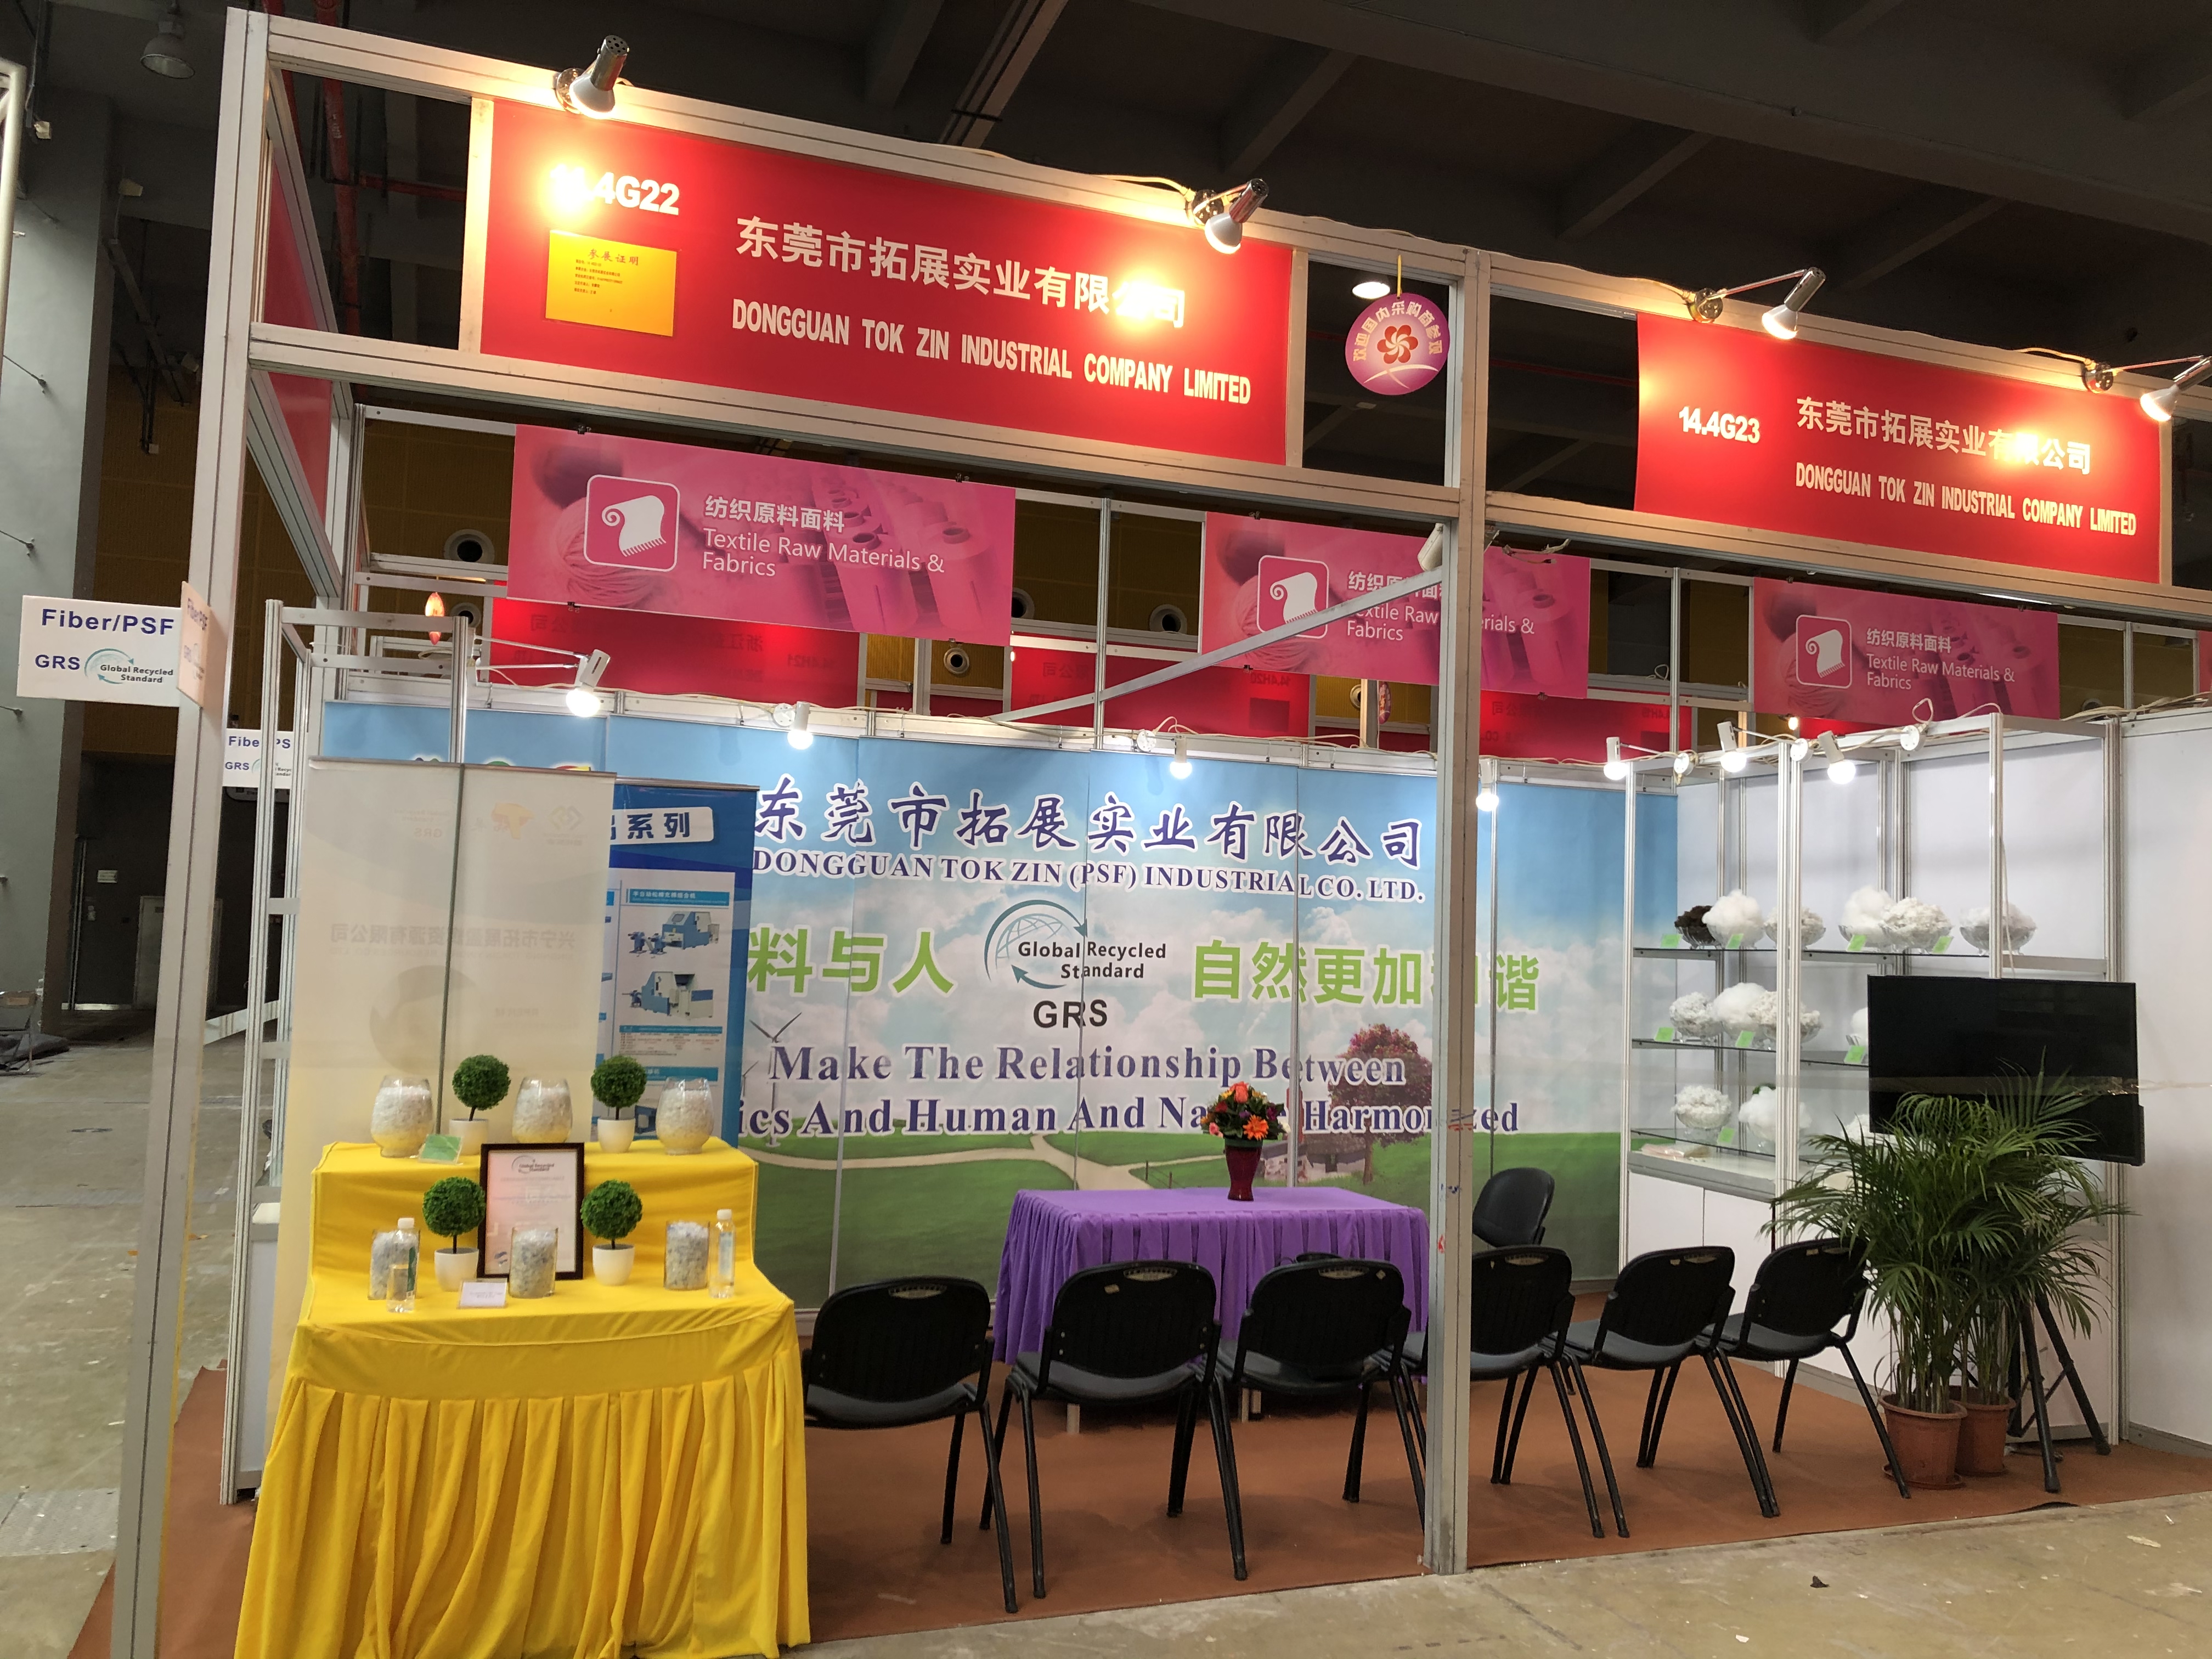 Experience of participating in the 125th Canton Fair